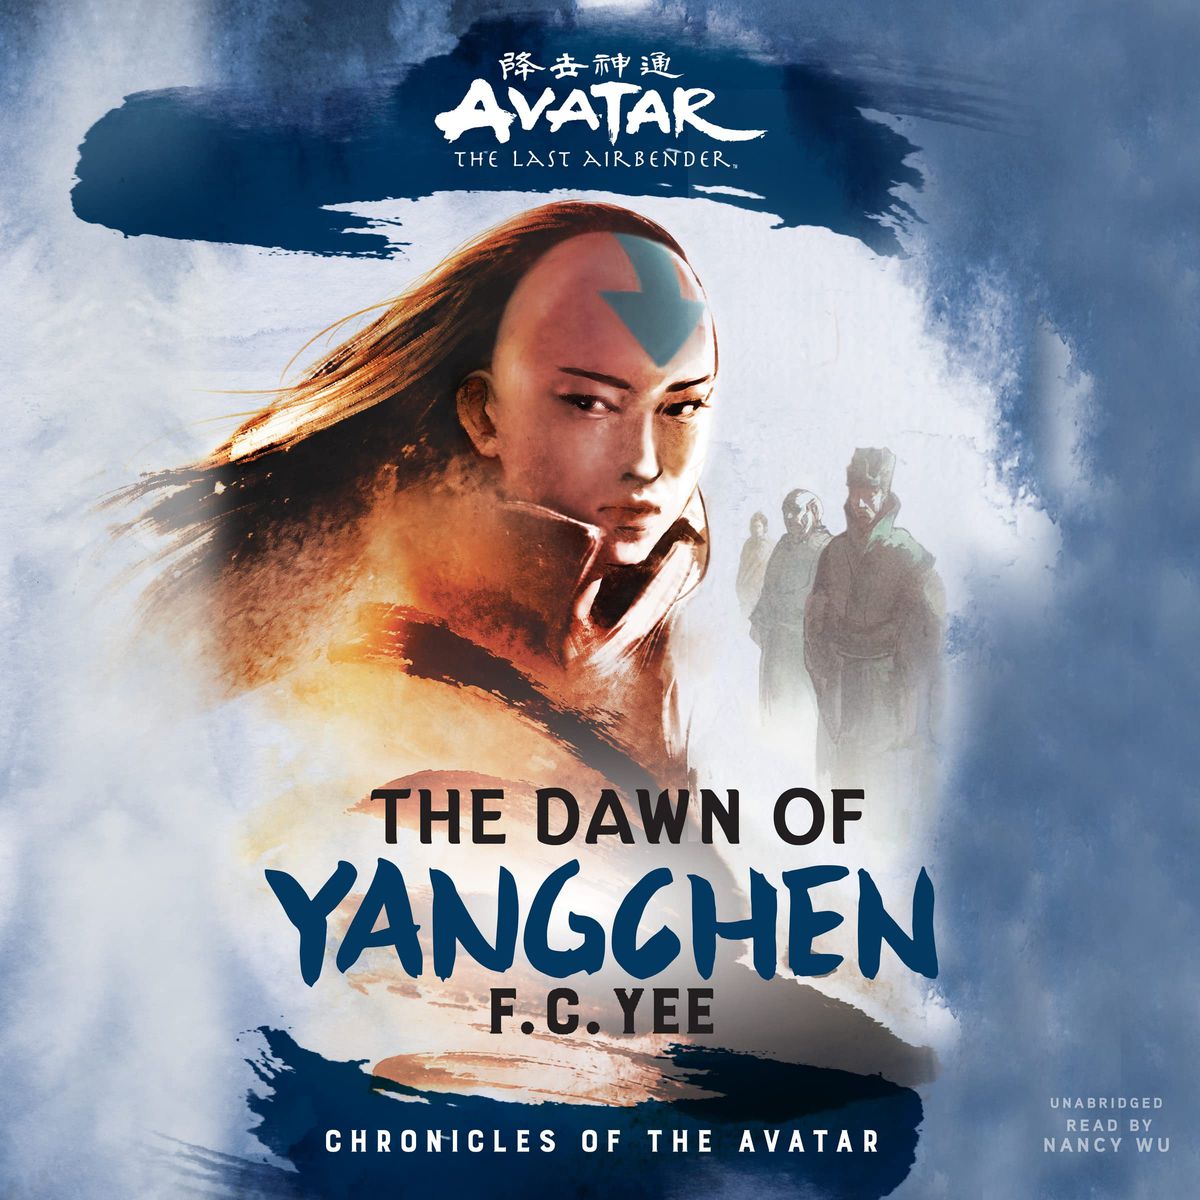 The book cover for Avatar, The Last Airbender: The Dawn of Yangchen, featuring a female Avatar in an abstracted robe, with a row of past Avatars behind her, stretching into the distance